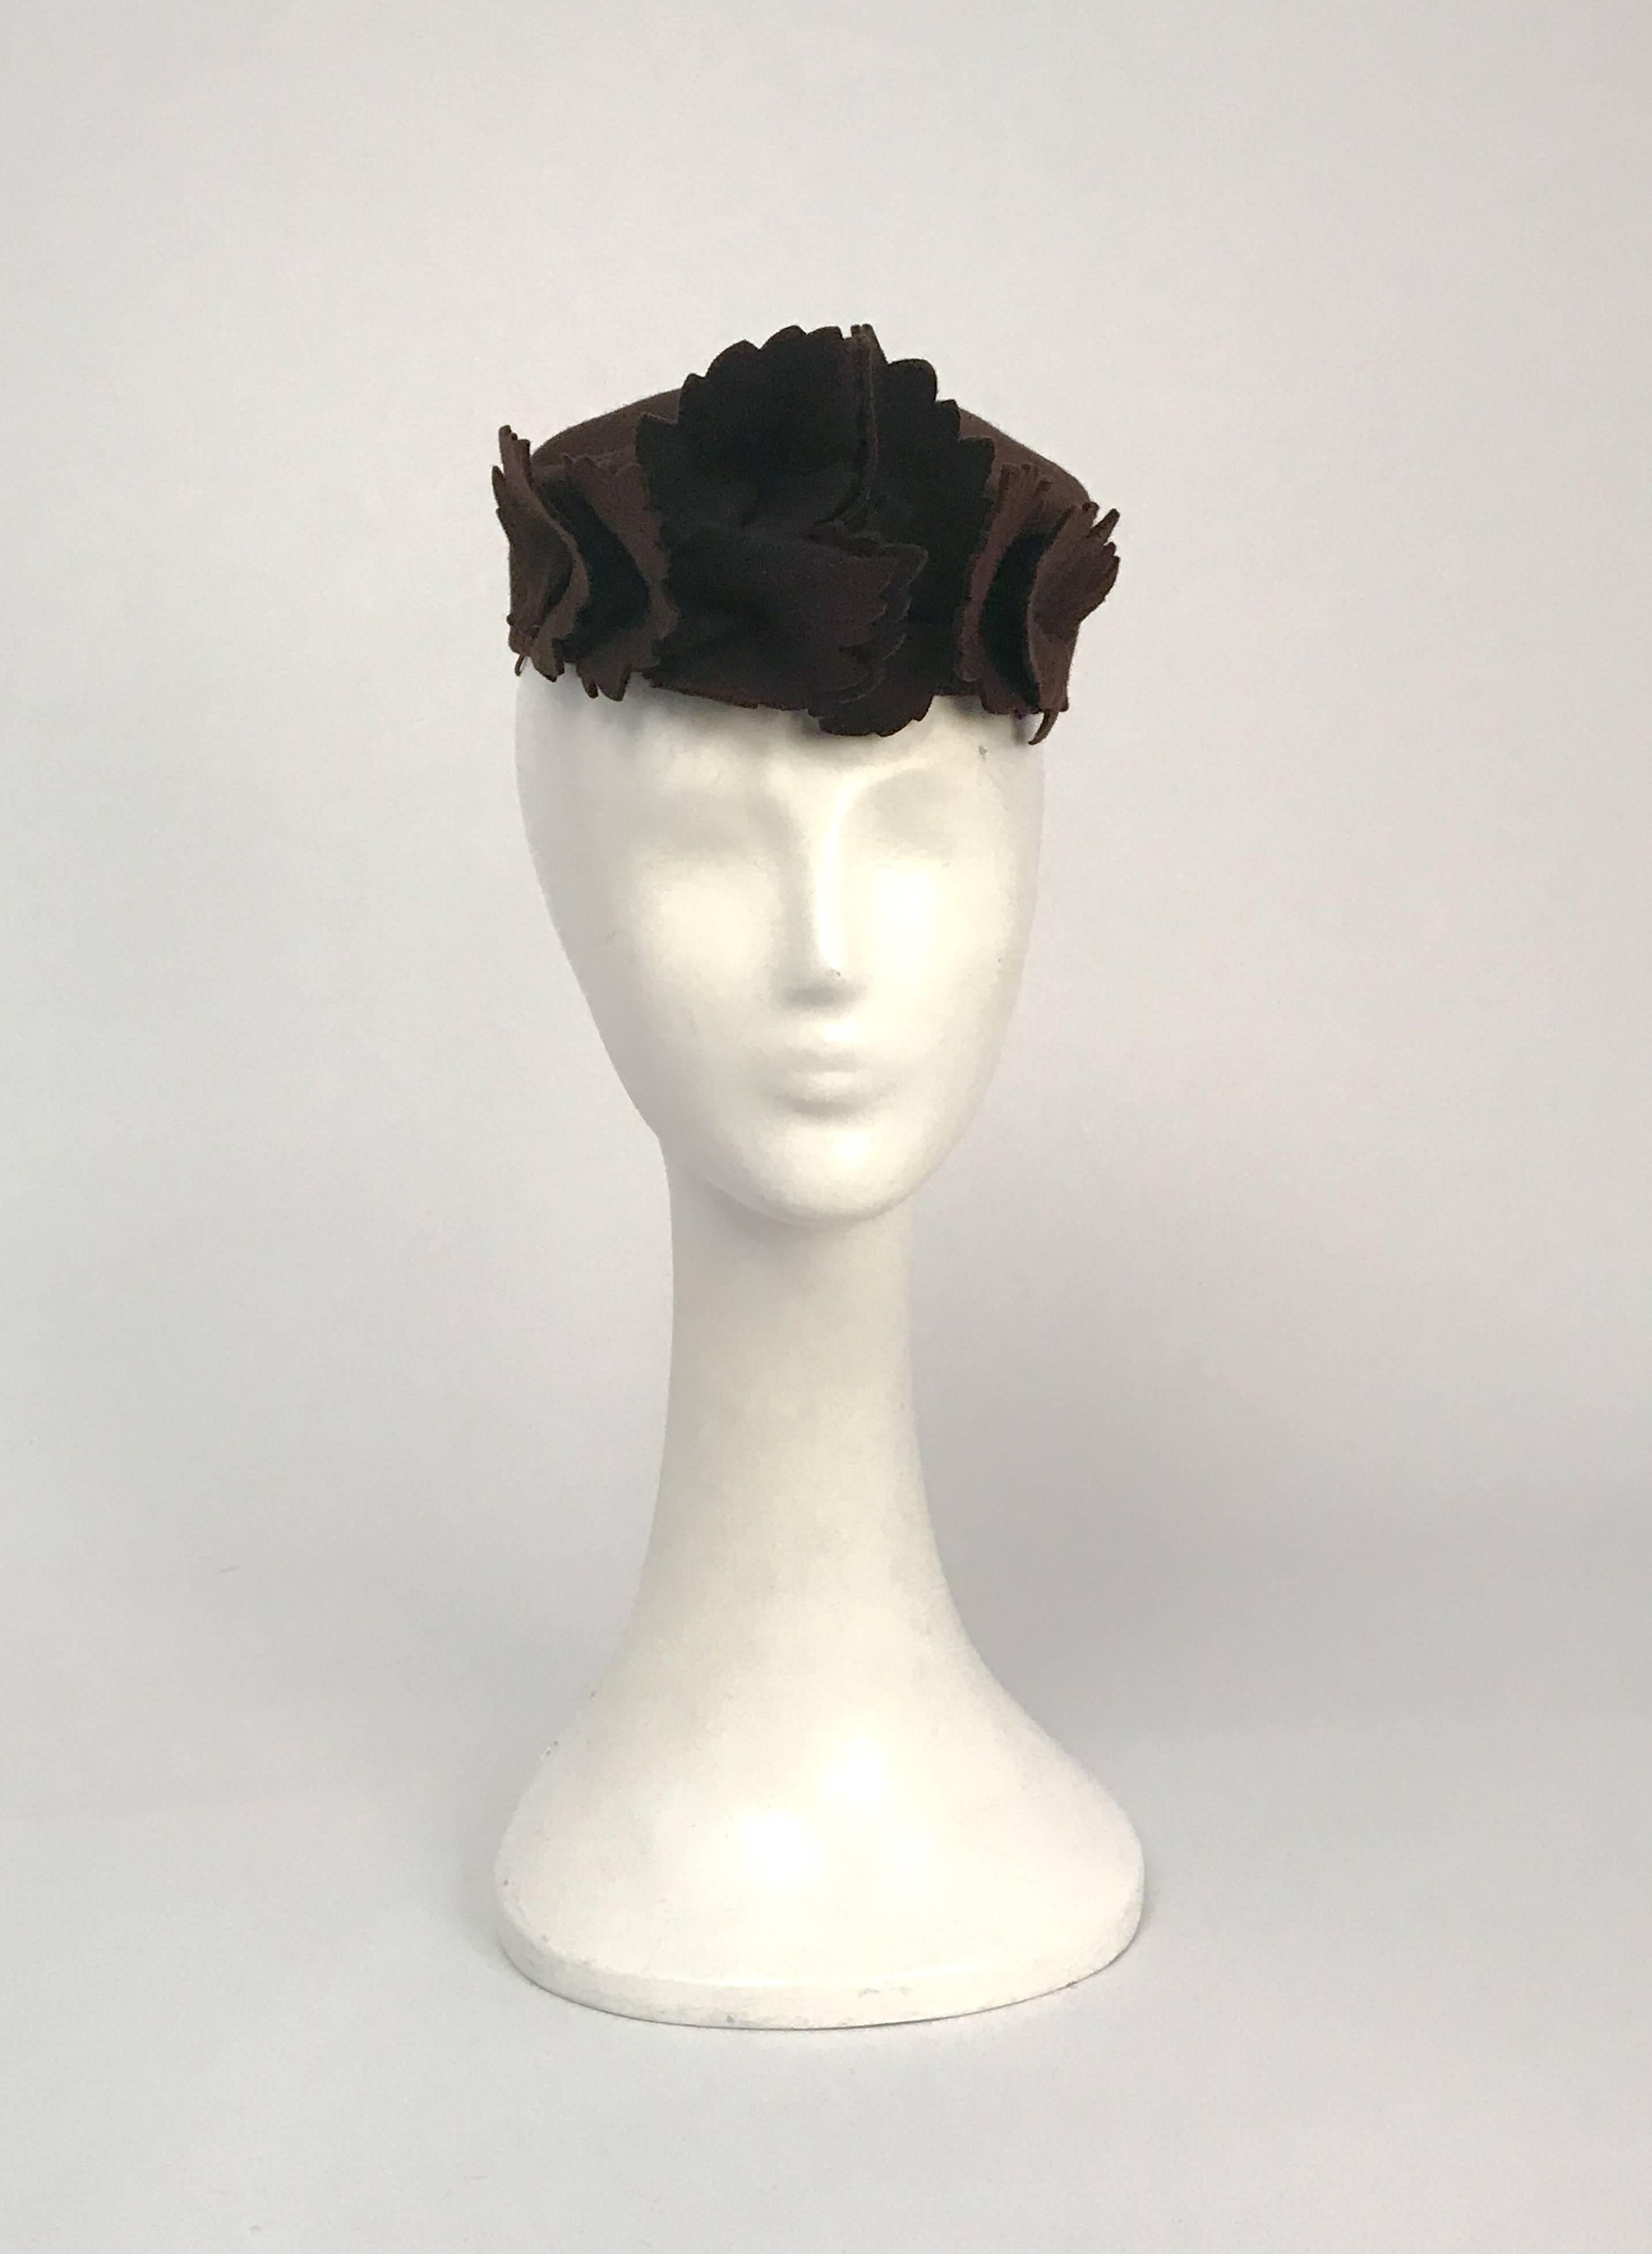 1930s Brown Leaf Embellished Wool Hat. Brown felt hat with brown leaf embellishments. Elastic band to secure hat to head. 22 inch circumference.